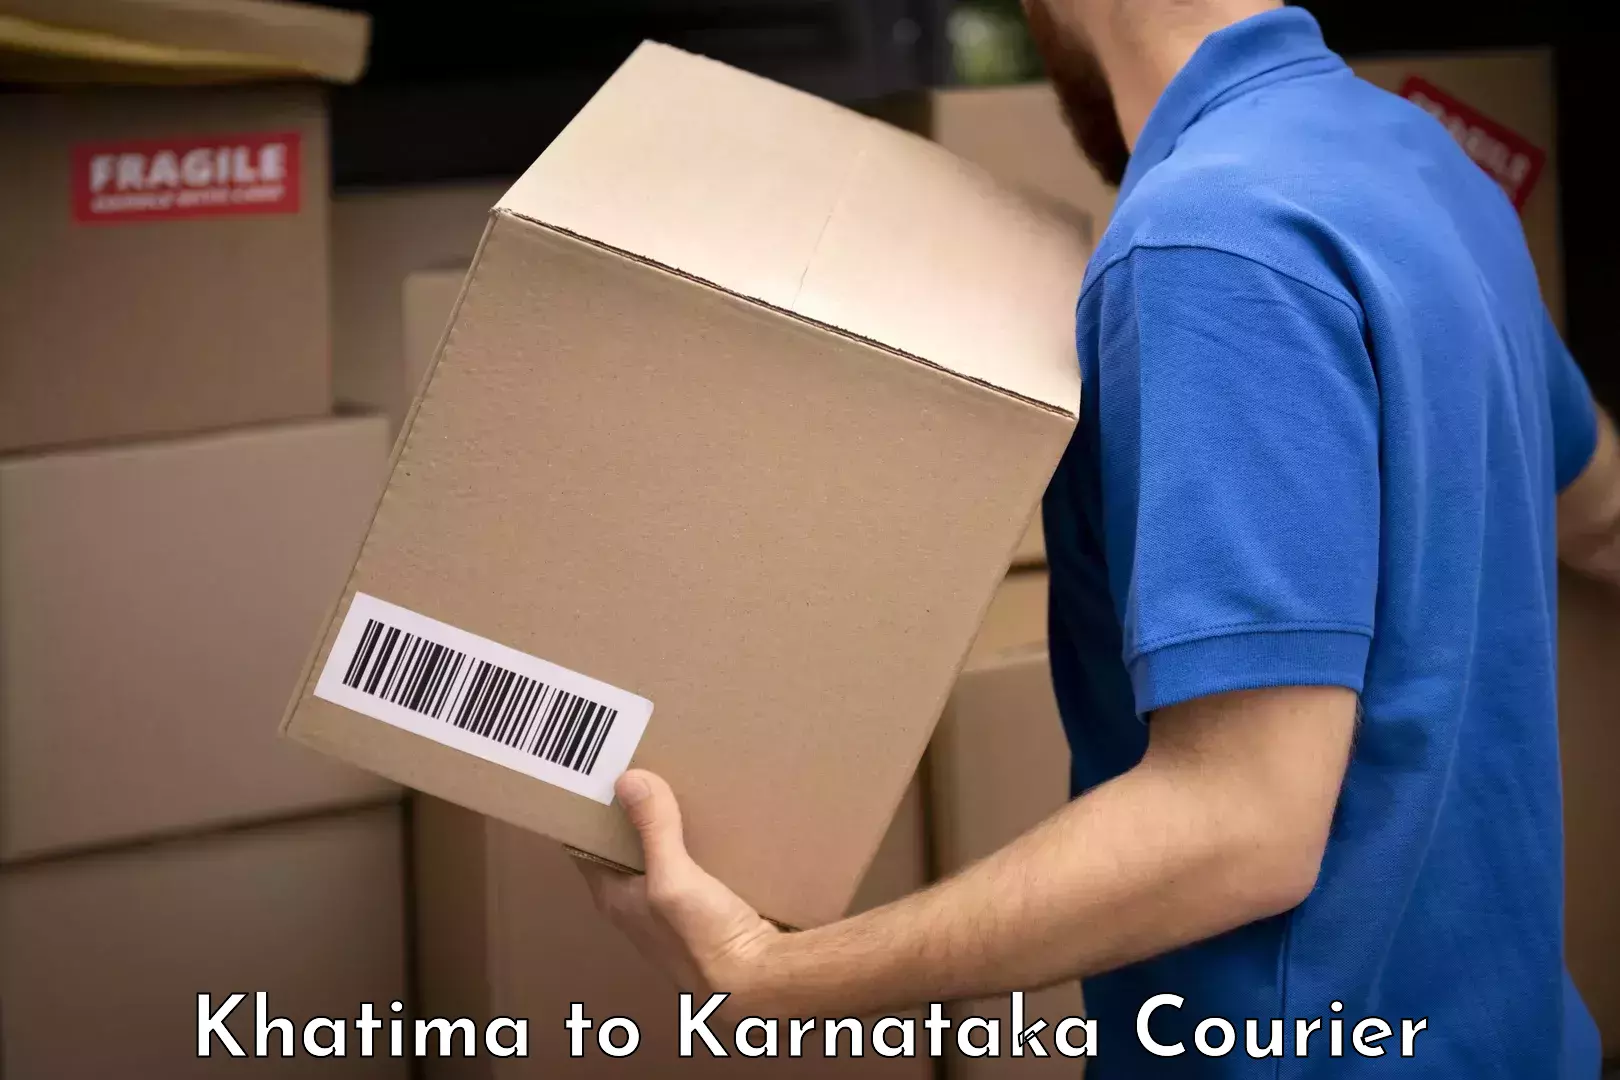 Baggage transport network Khatima to Indian Institute of Science Bangalore